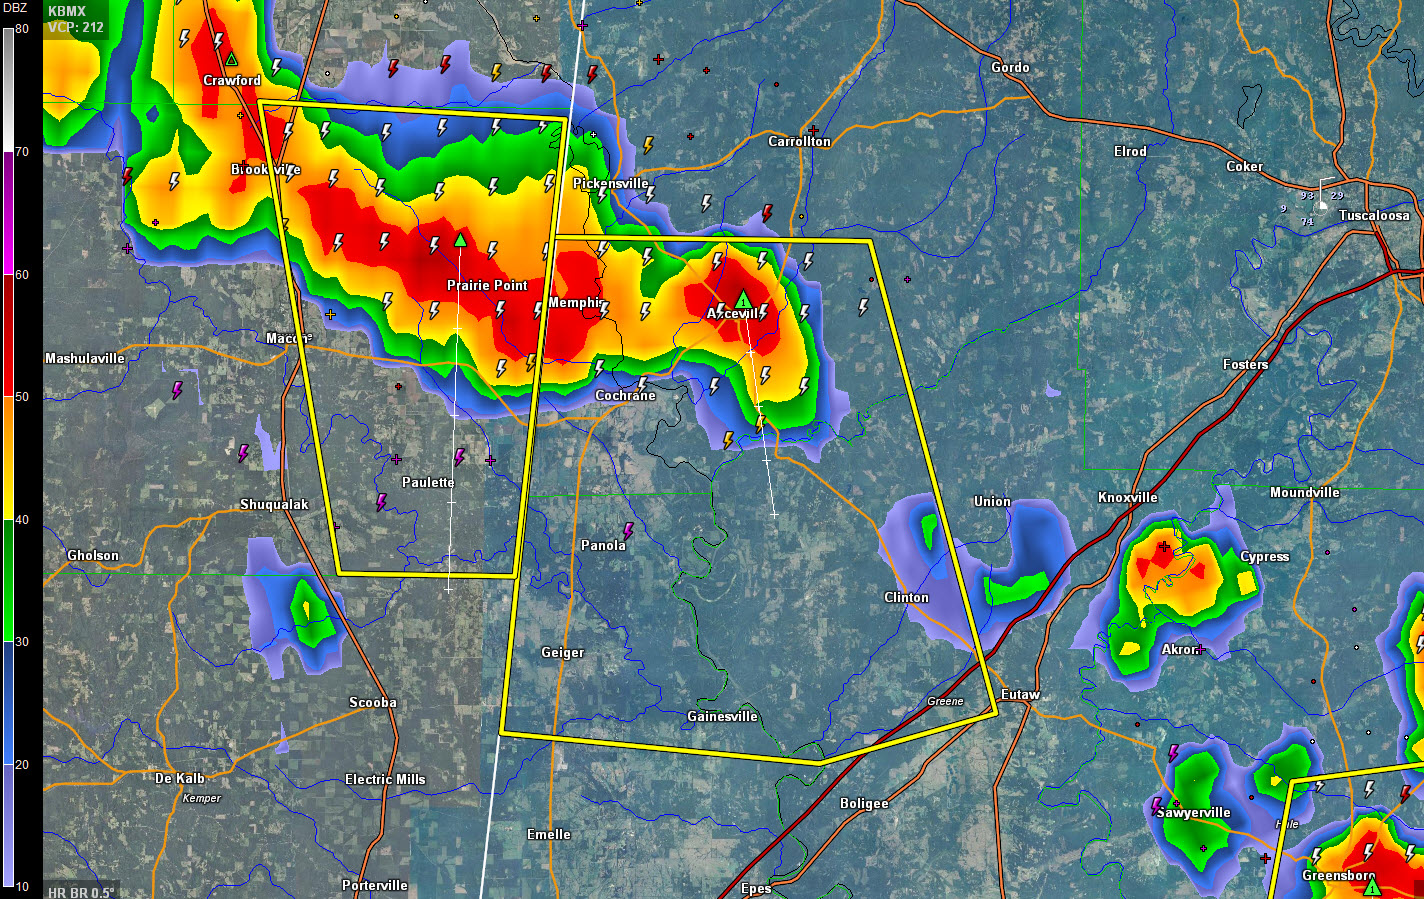 Severe Thunderstorm Warning:  NW Sumter, SW Pickens & NW Greene Counties